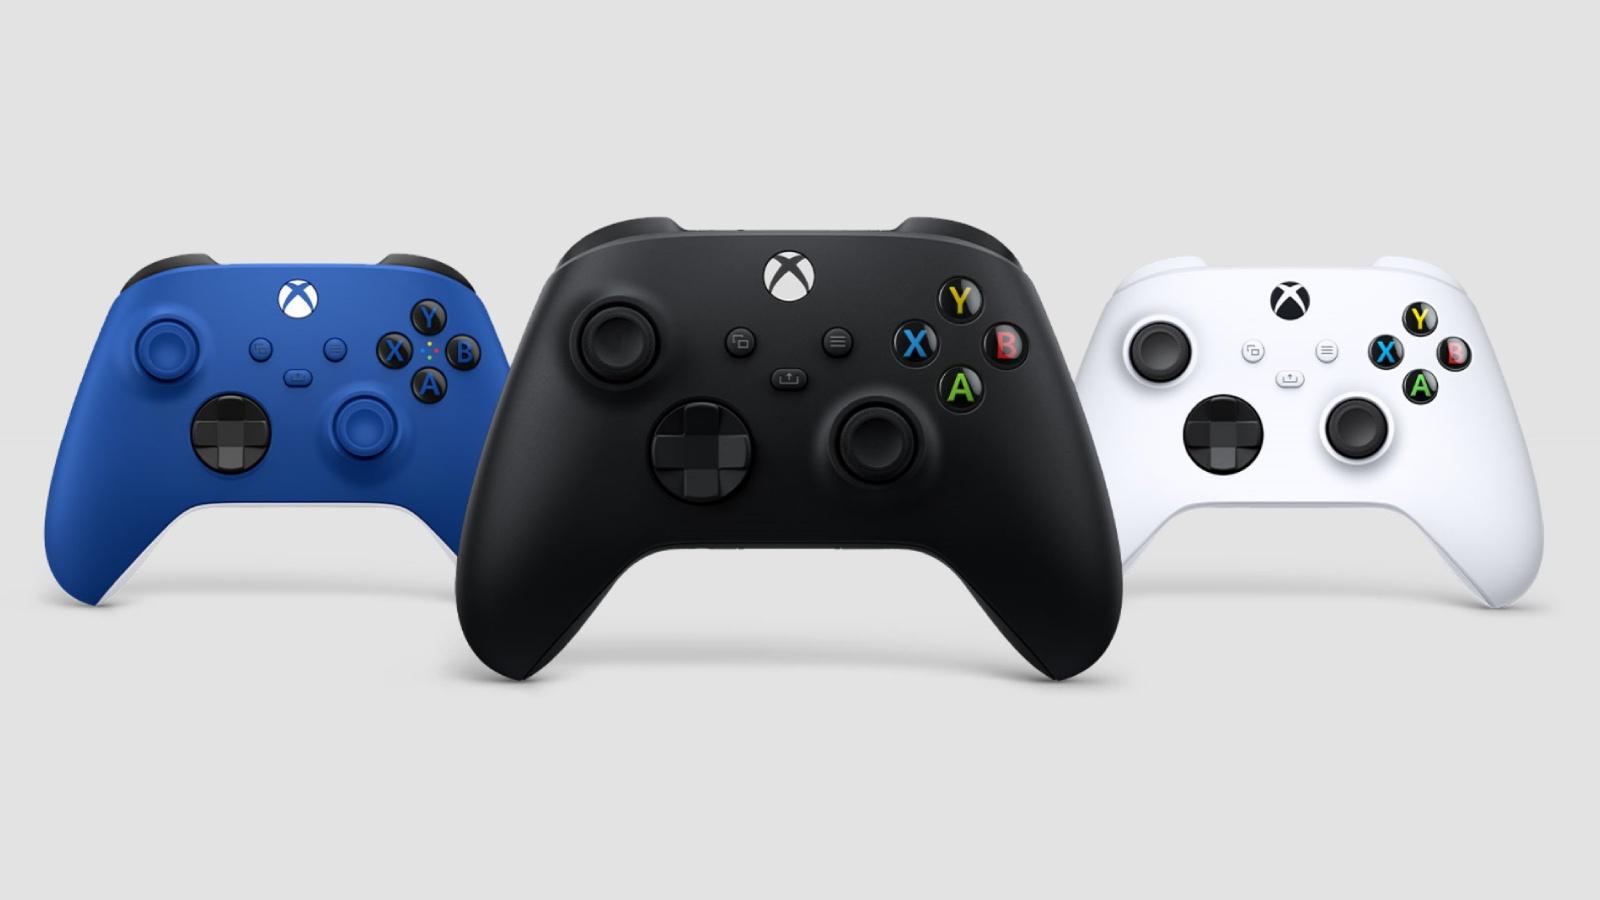 Xbox Series Controllers in Blue, Black and White